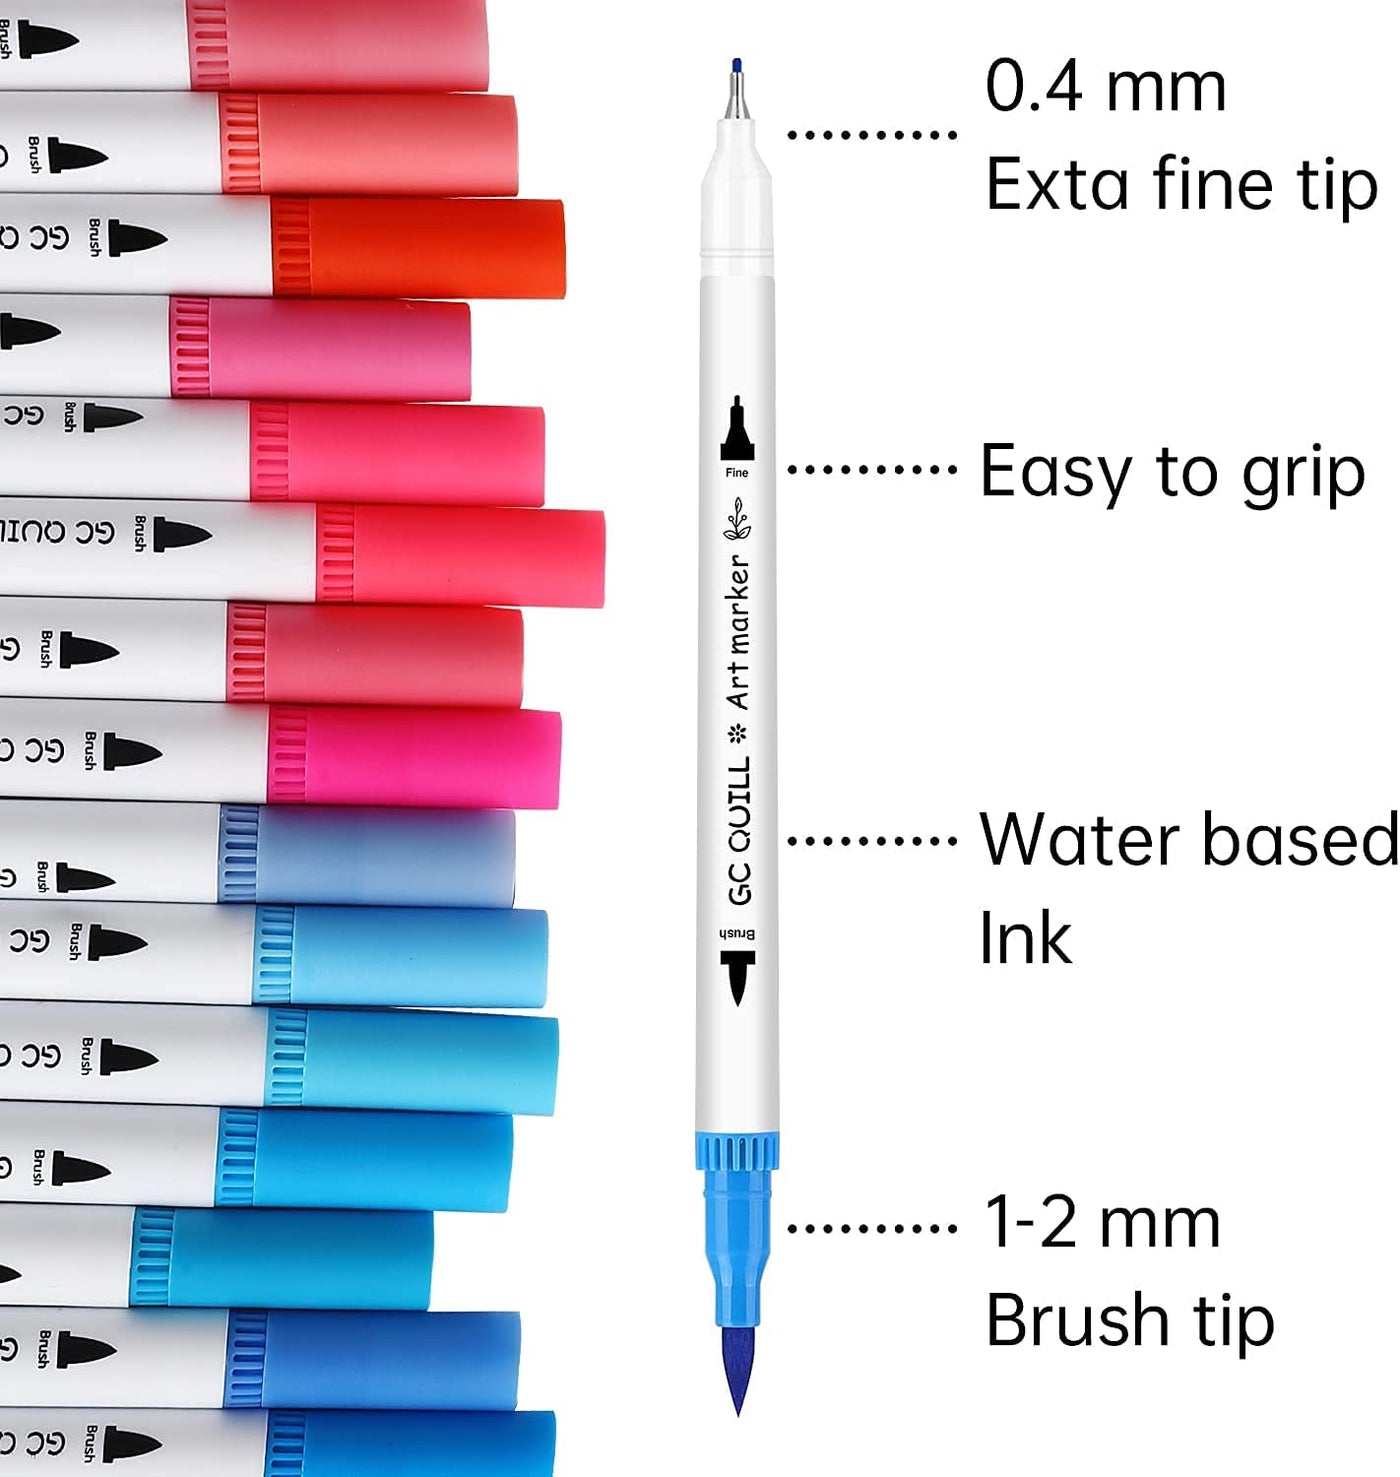 hhhouu 150 Colors Dual Tip Brush Pens Art Markers Set, Fine Tip Markers for Adult Coloring, Bullet Journals, Drawing, Lettering Calligraphy HO-150B